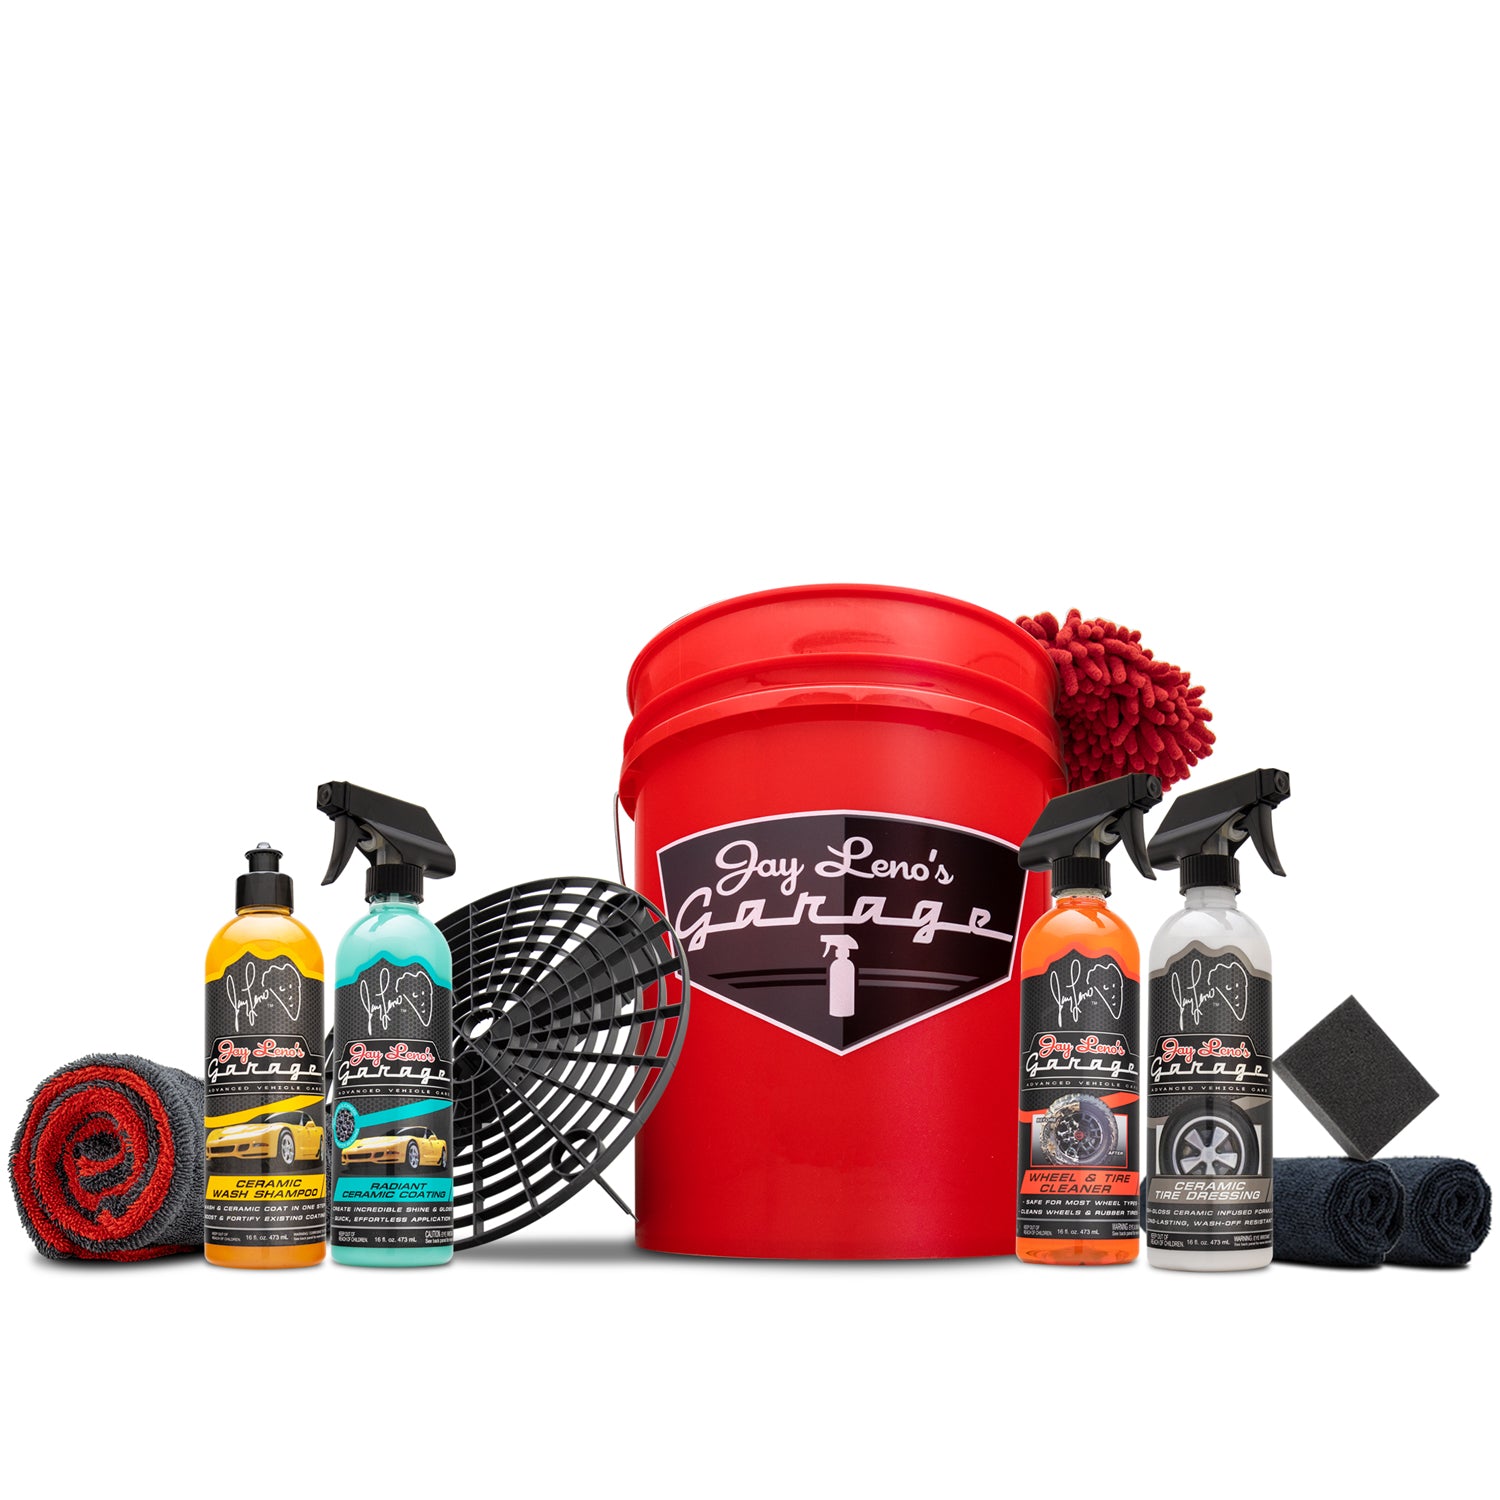 Jay Leno Unveils Three New Spectacular Car Care Products at SEMA